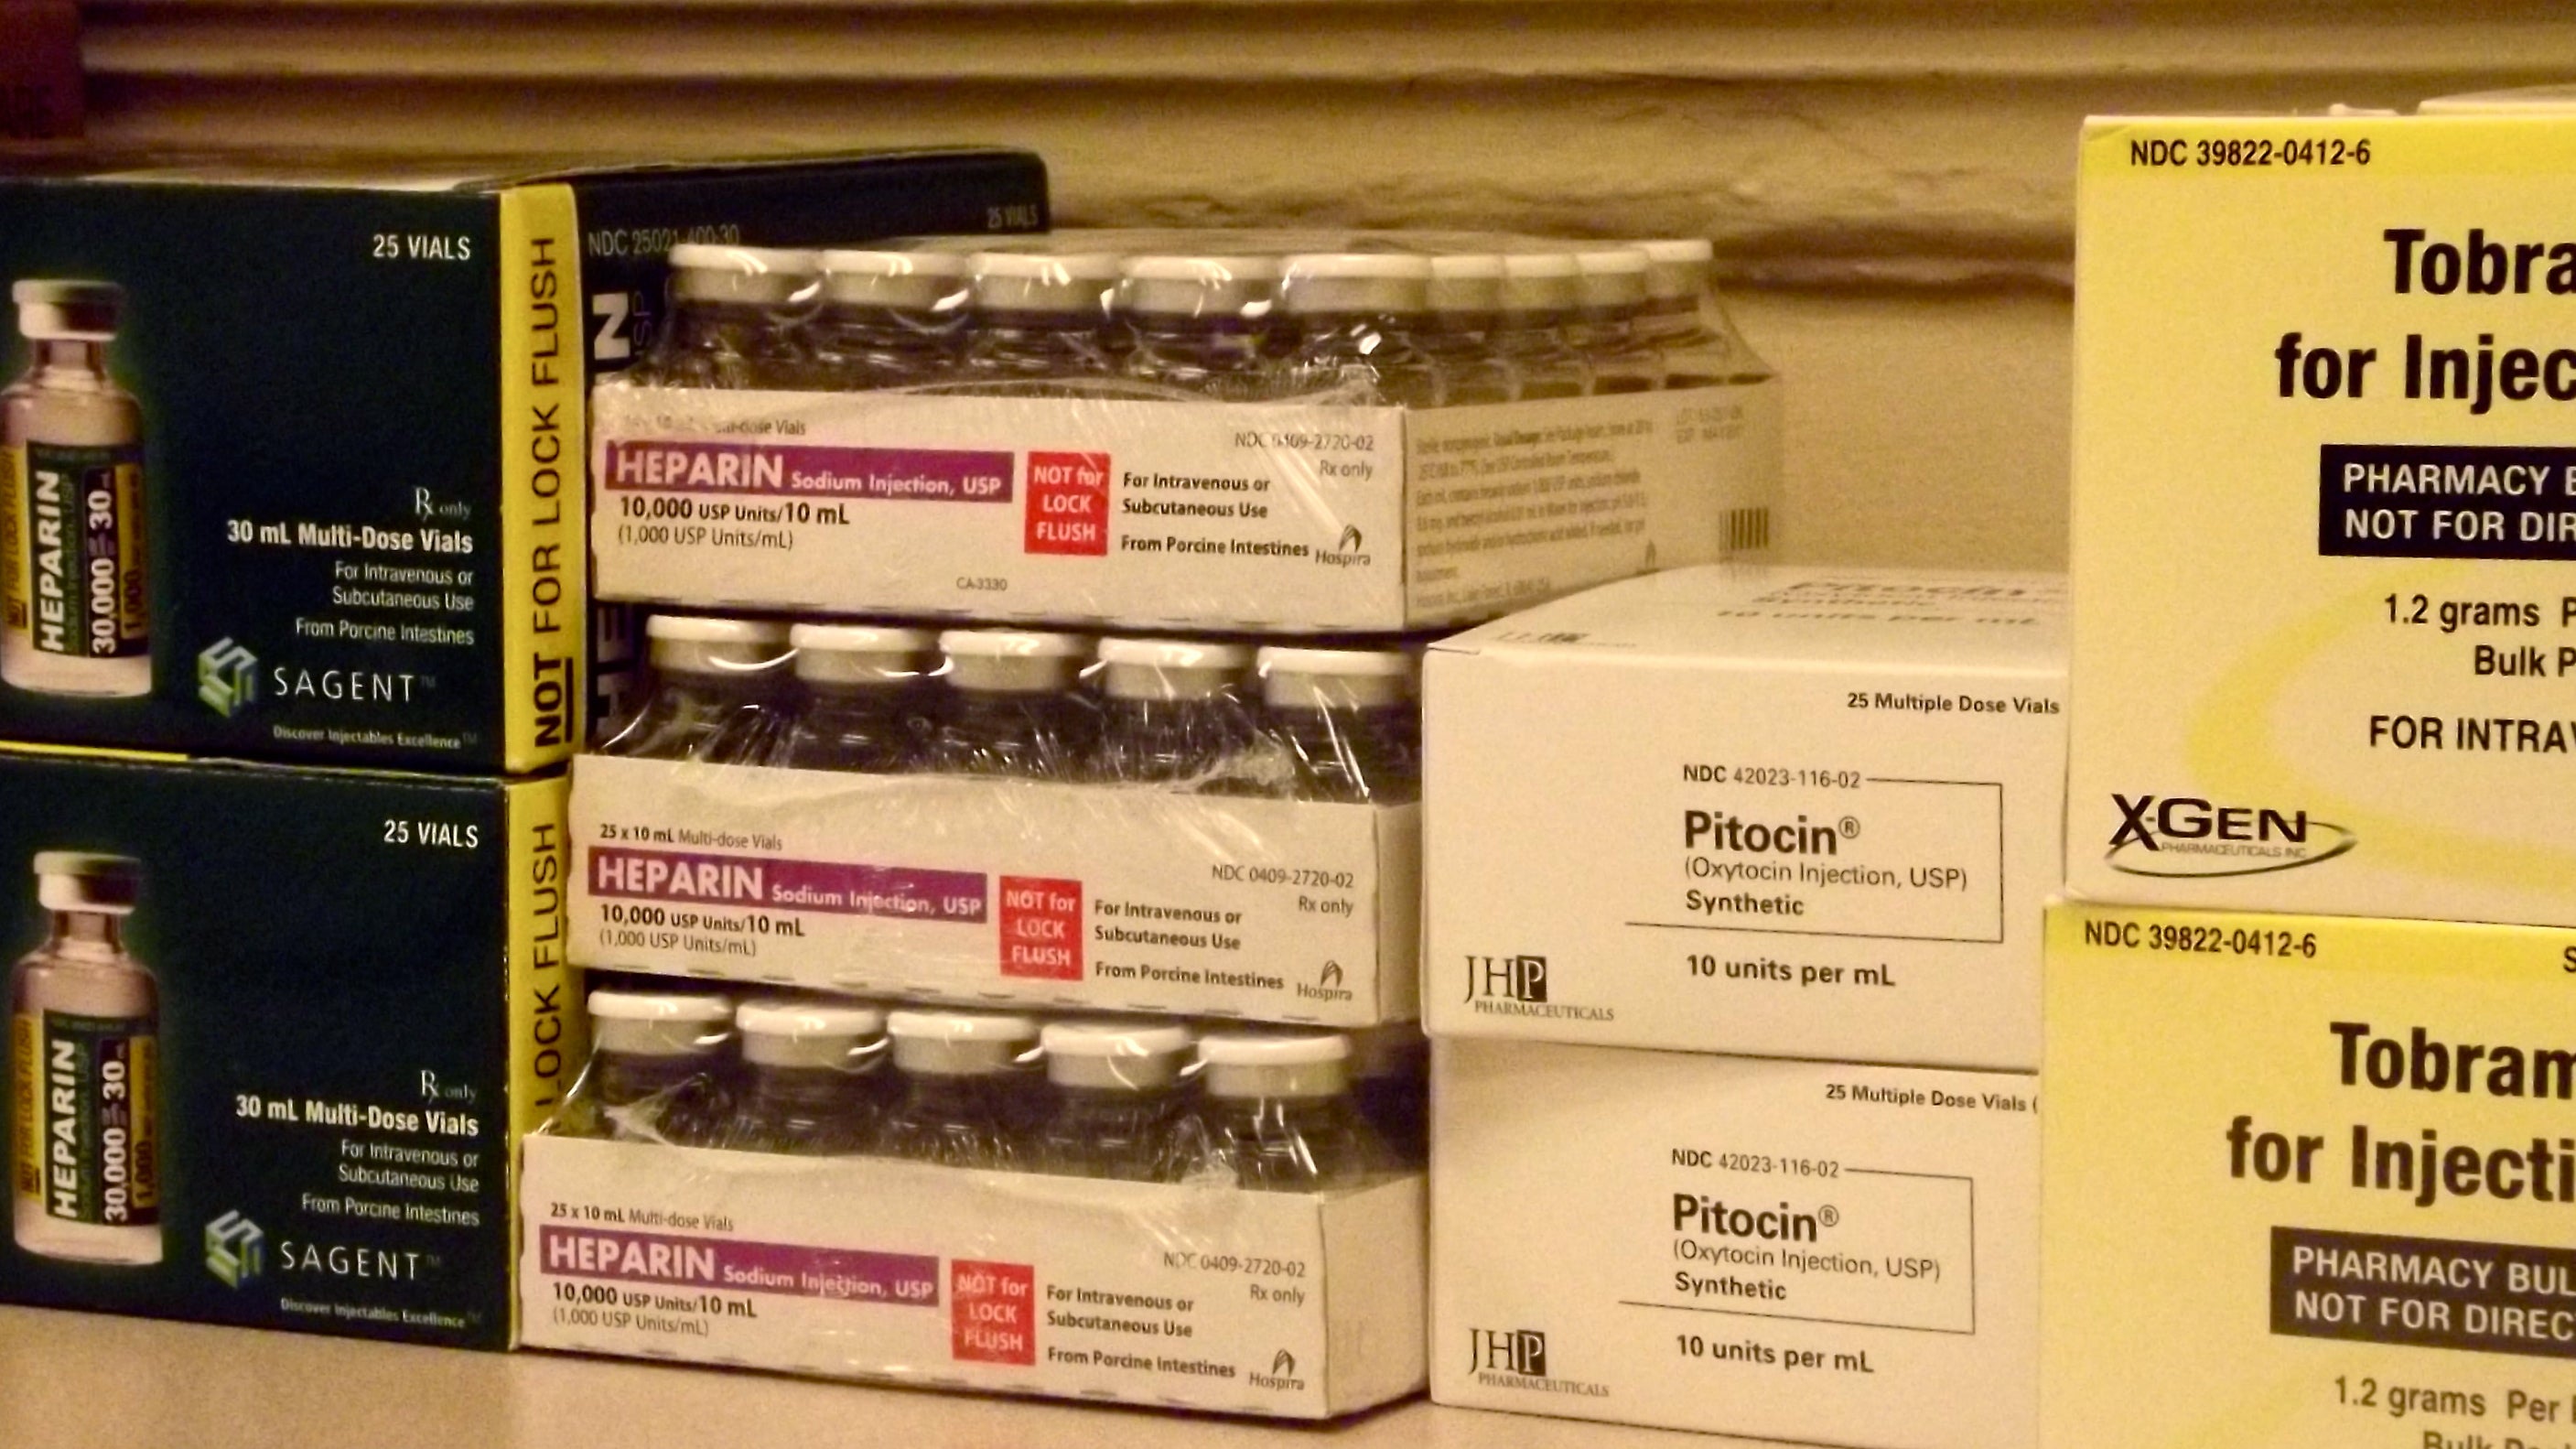  Pennsylvania Hospital has stockpiled extra medication in preparation for an expected surge of patients during the papal visit in Philadelphia. (Taunya English/ WHYY). 